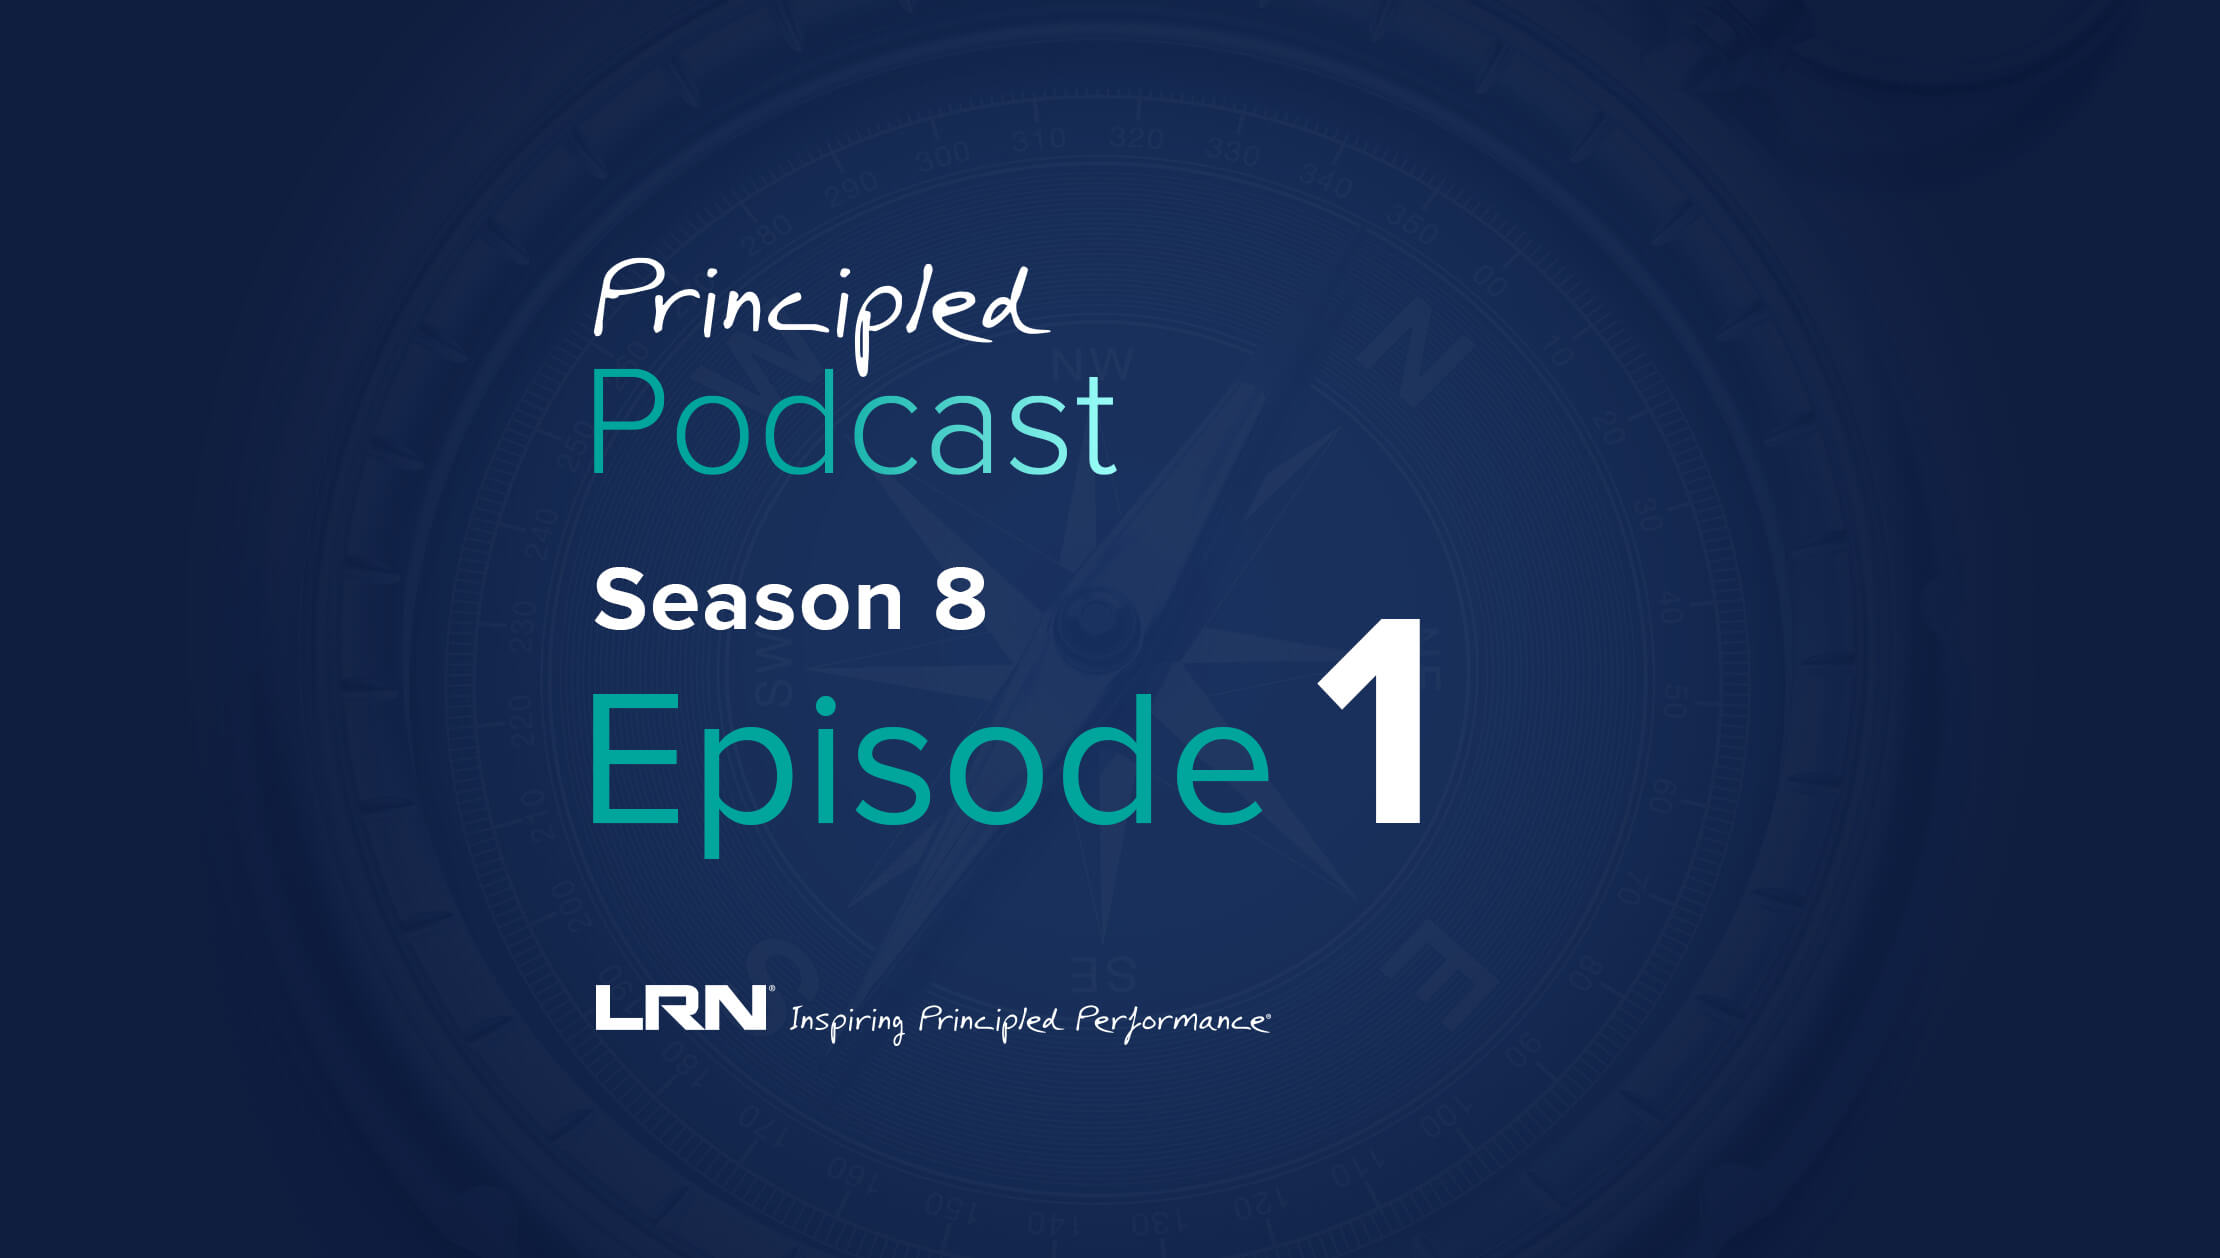 LRN Principled Podcast Season 8 Episode 1 – How can boards assess corporate culture and improve oversight?